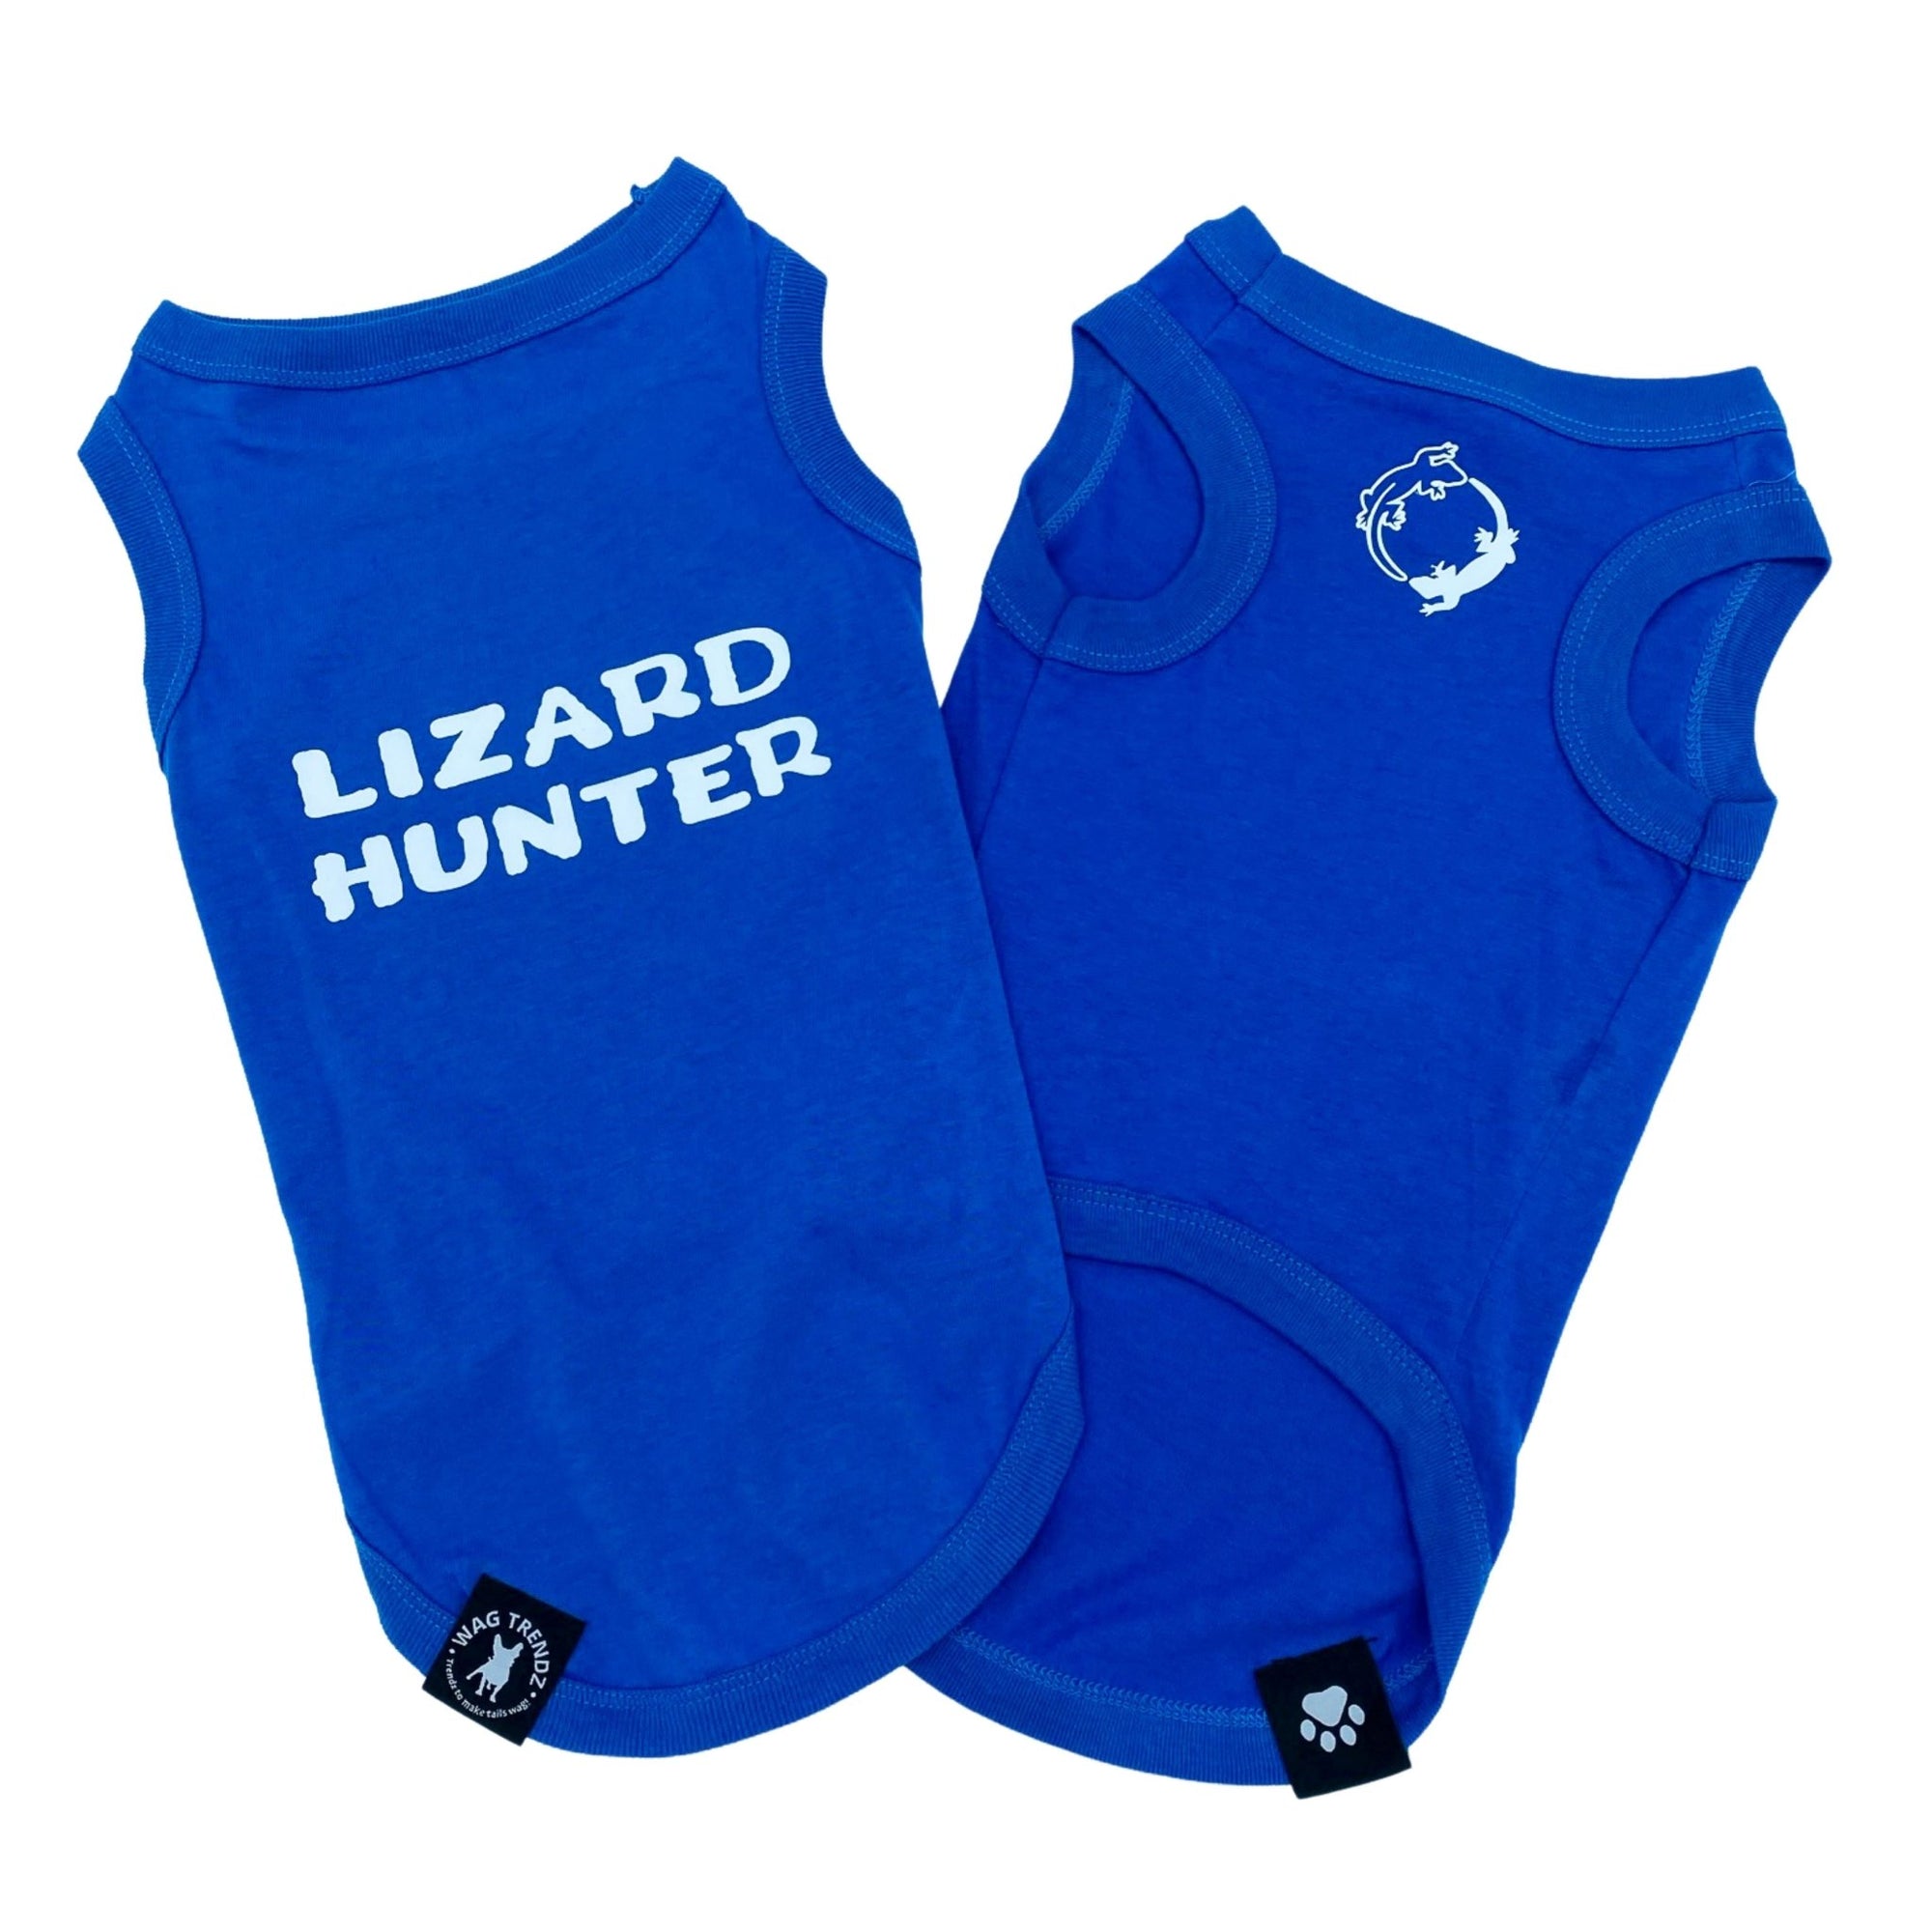 Dog T-Shirt - &quot;Lizard Hunter&quot; - Royal Blue dog t-shirts - back view with Lizard Hunter lettering in white and chest view with lizards making a circle emoji - against solid white background - Wag Trendz